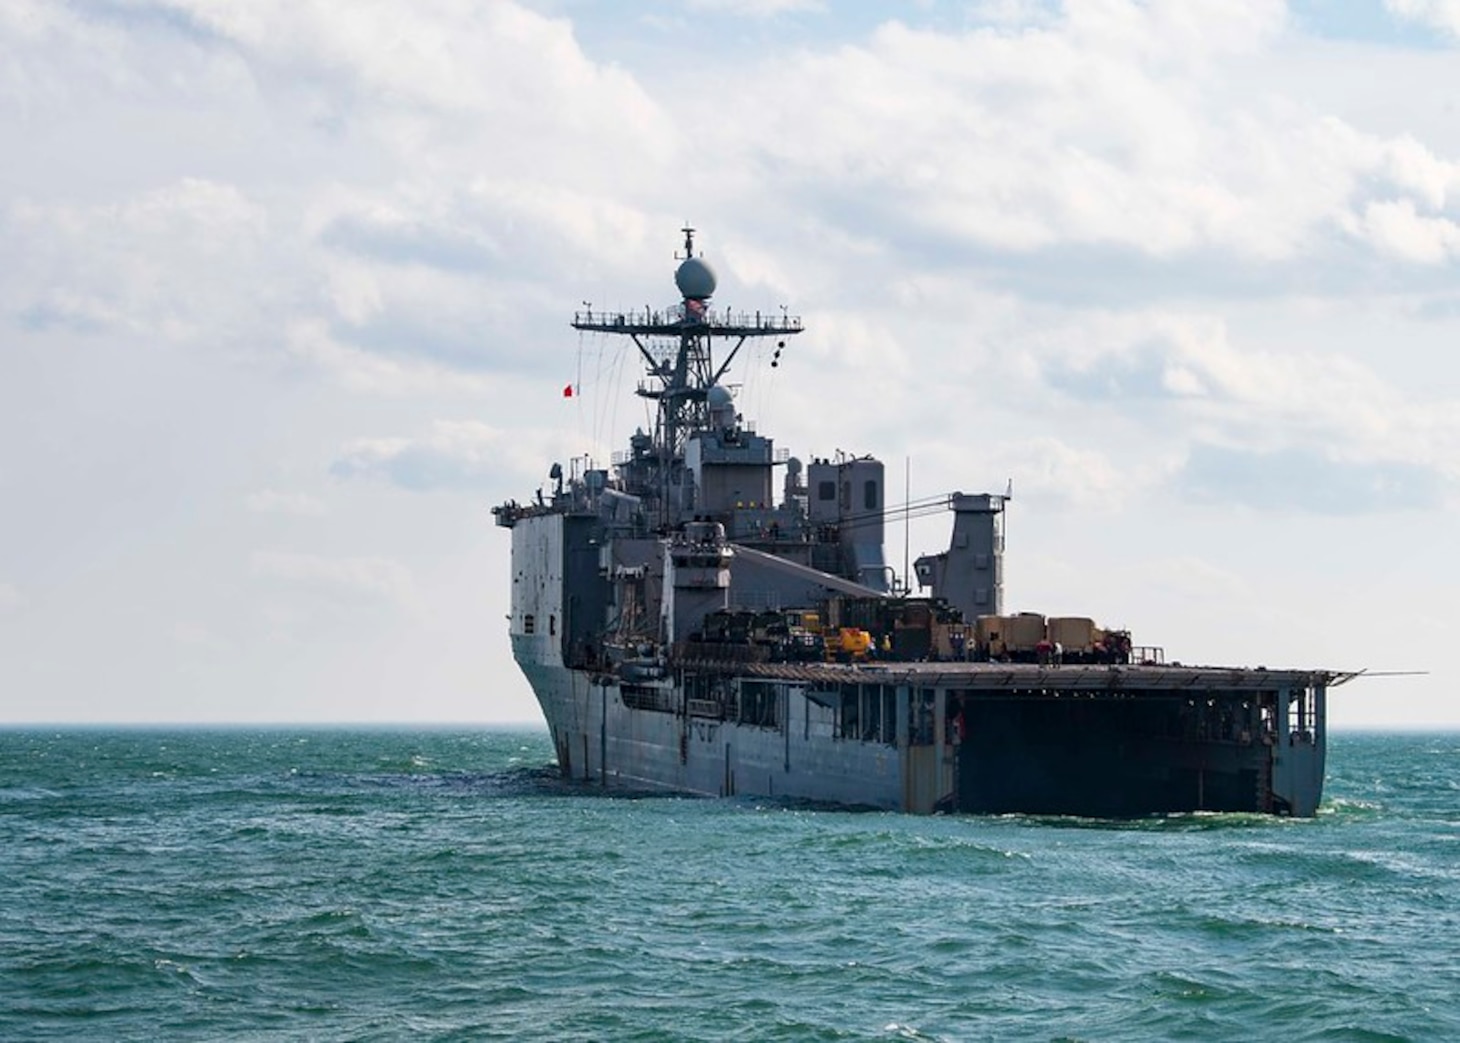 USS Carter Hall arrives at Plymouth, England > U.S. Naval Forces Europe